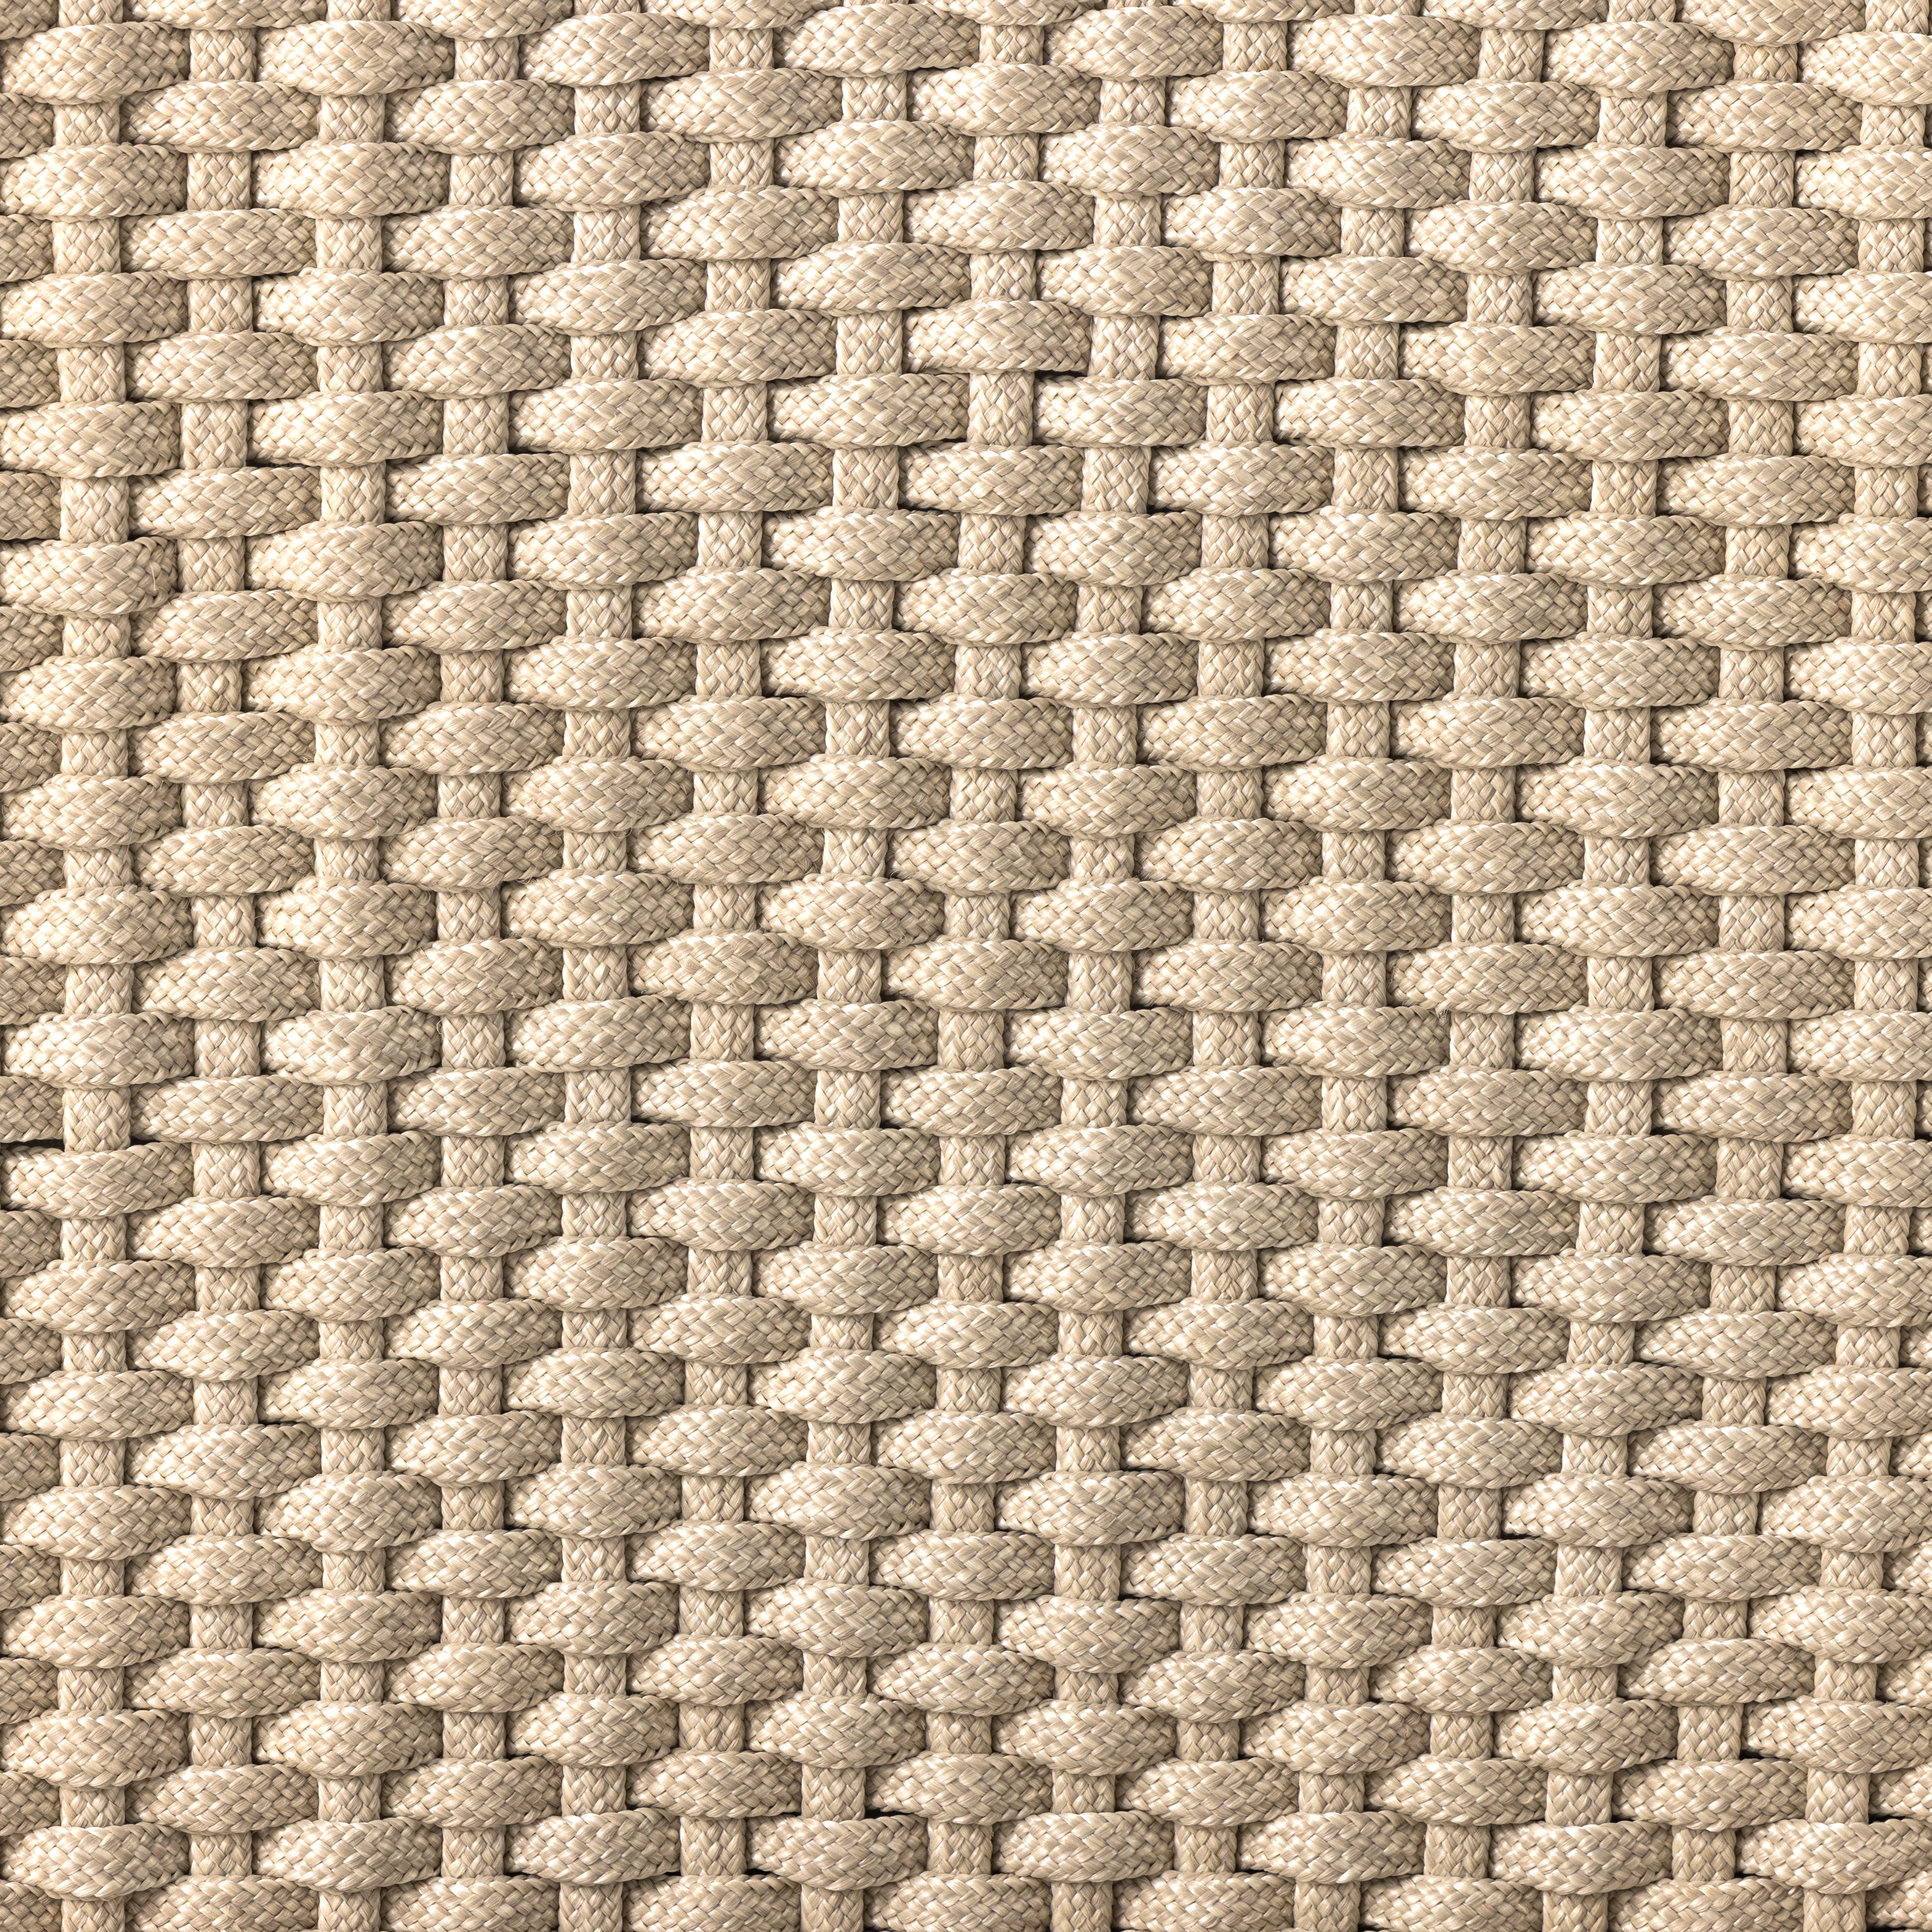 A textural take on outdoor bar styling, natural teak welcomes thick, handwoven rope seating in an inviting ivory. Safe for outdoor spaces. Cover or store indoors during inclement weather and when not in use. Amethyst Home provides interior design, new construction, custom furniture, and area rugs in the Des Moines metro area.